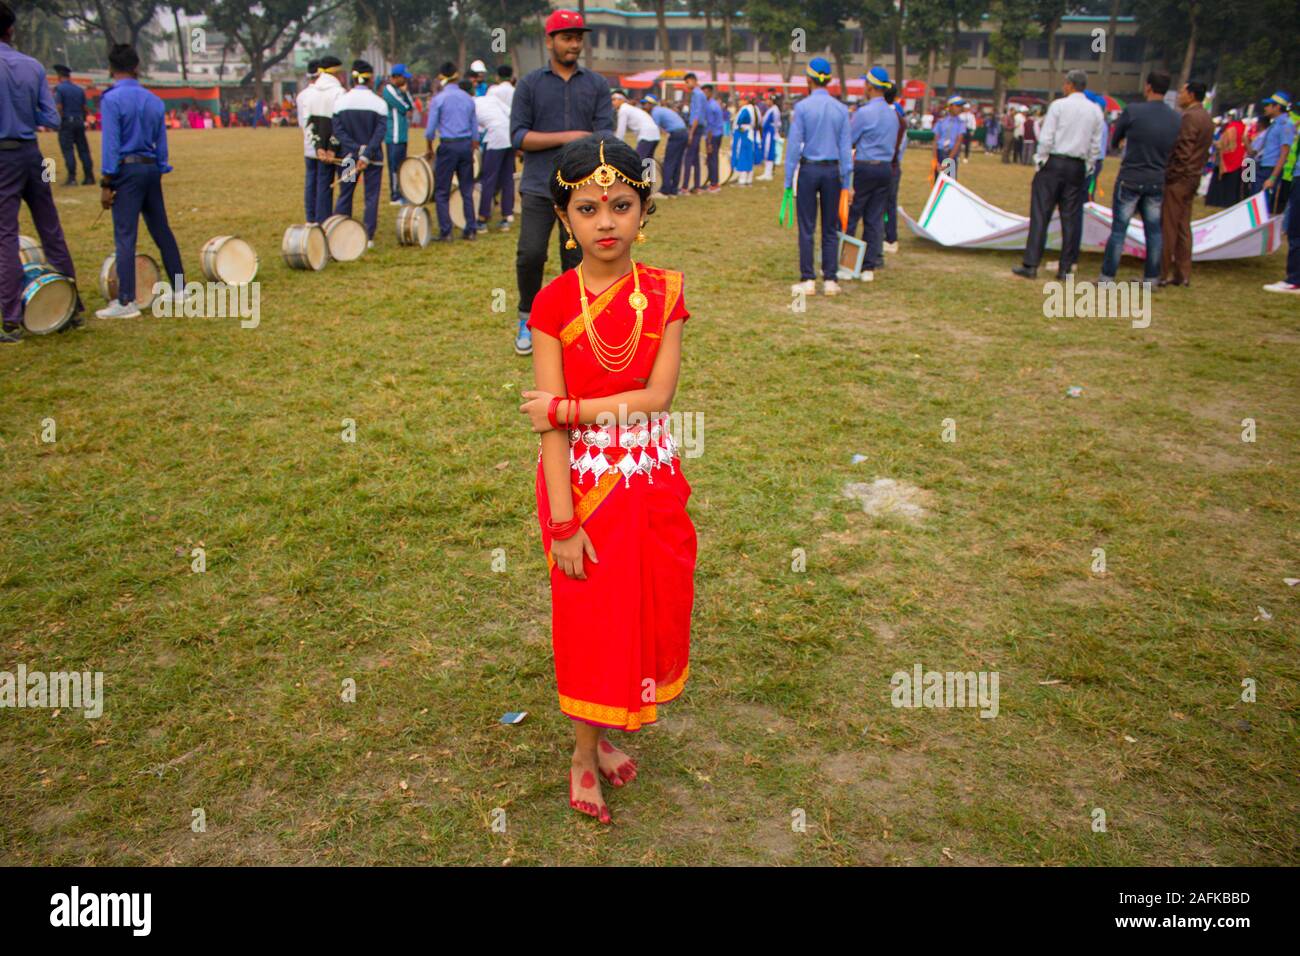 Traditionally celebrating Victory day of Bangladesh: South Asian cute girl participating fancy dress competition by wearing jewelry and costume Stock Photo